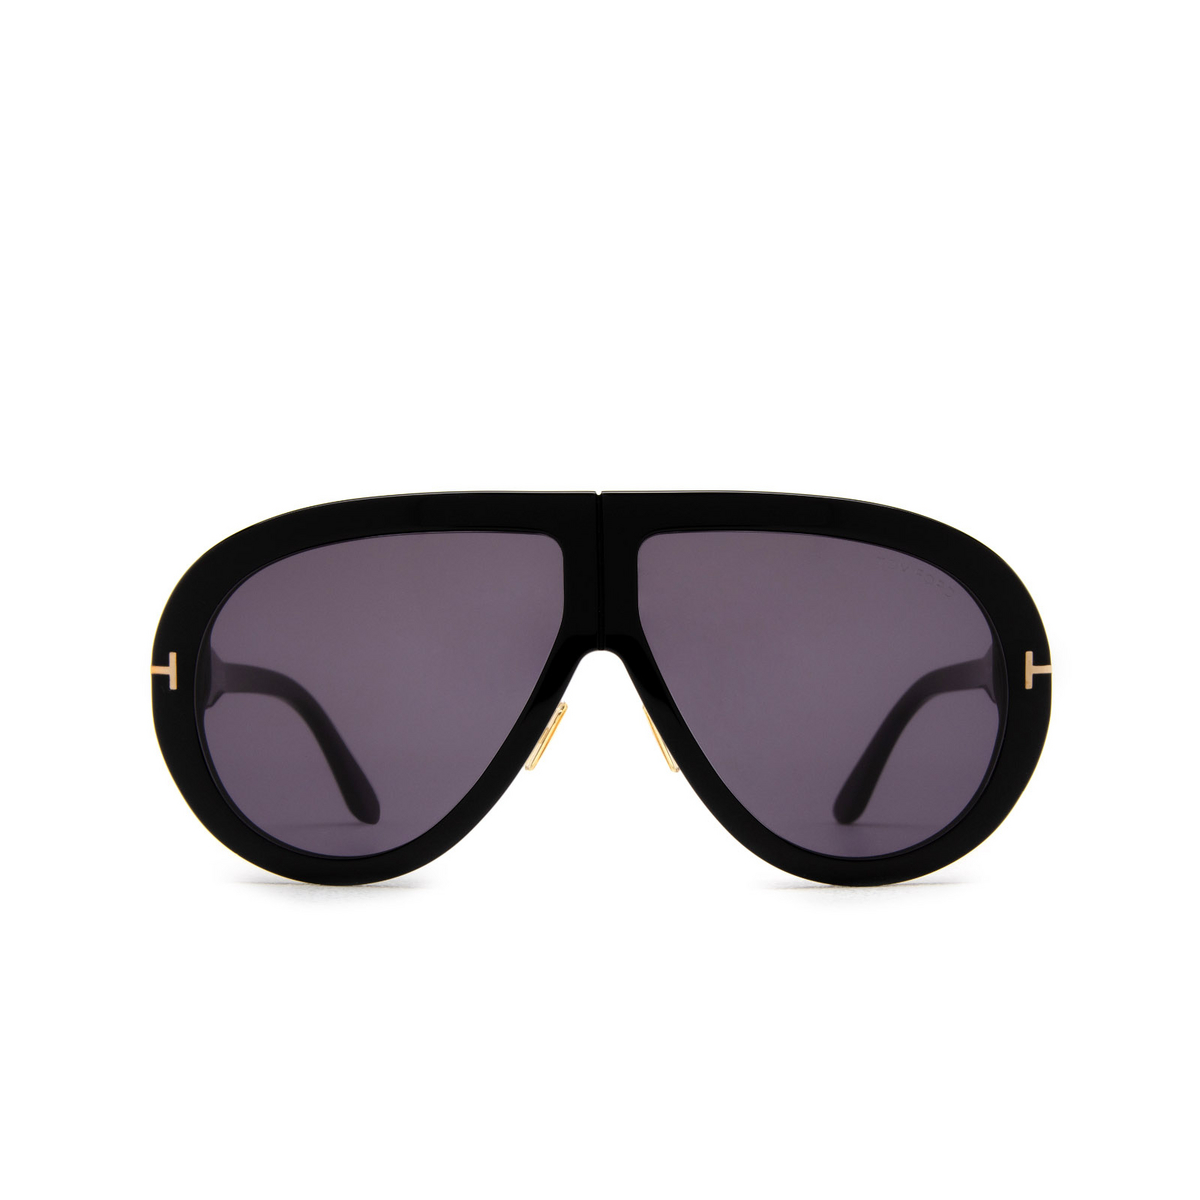 Tom Ford TROY Sunglasses 01A Shiny Black - front view